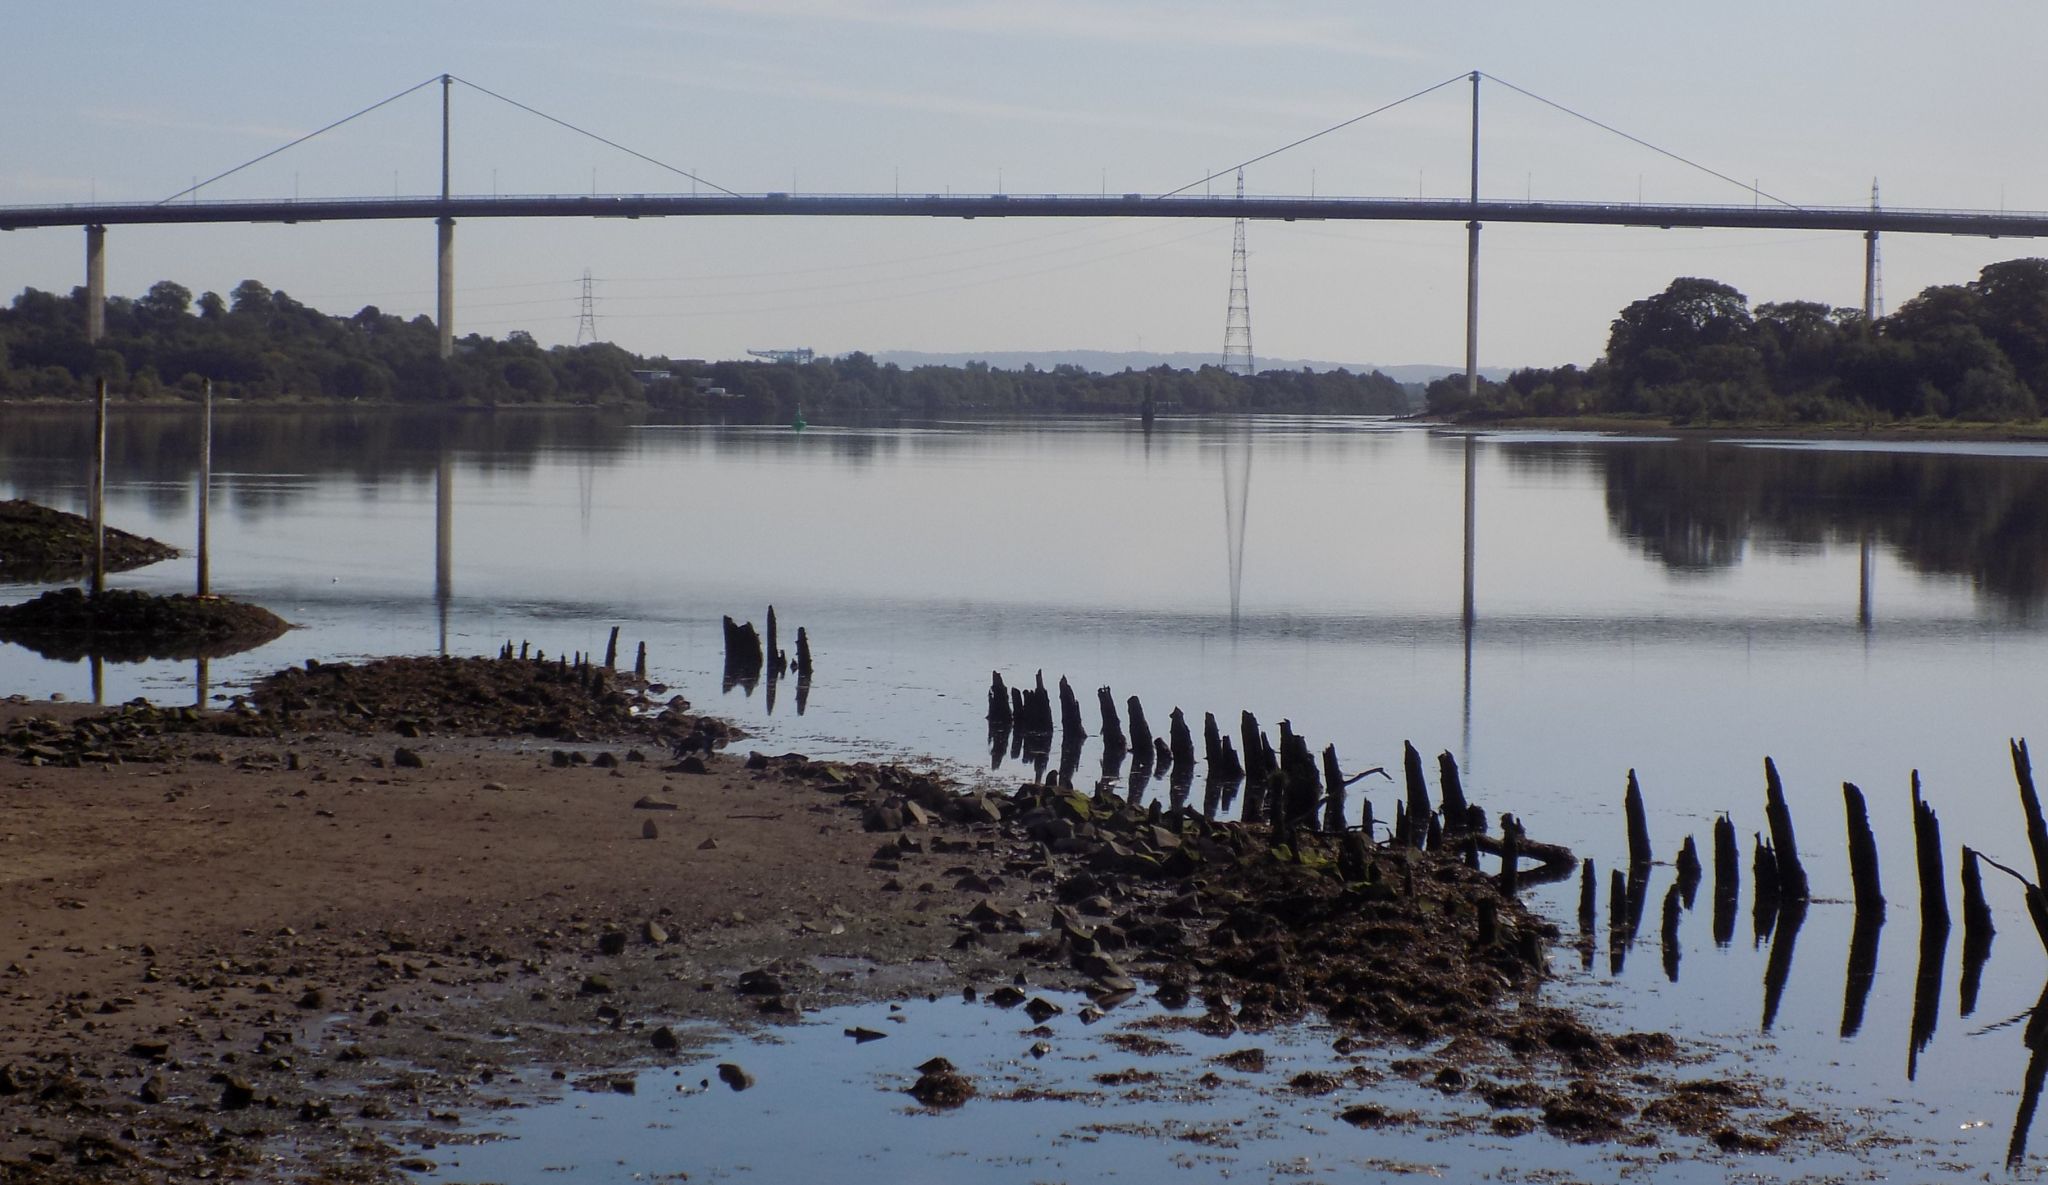 Erskine Bridge across River Clyde from Bowling basin